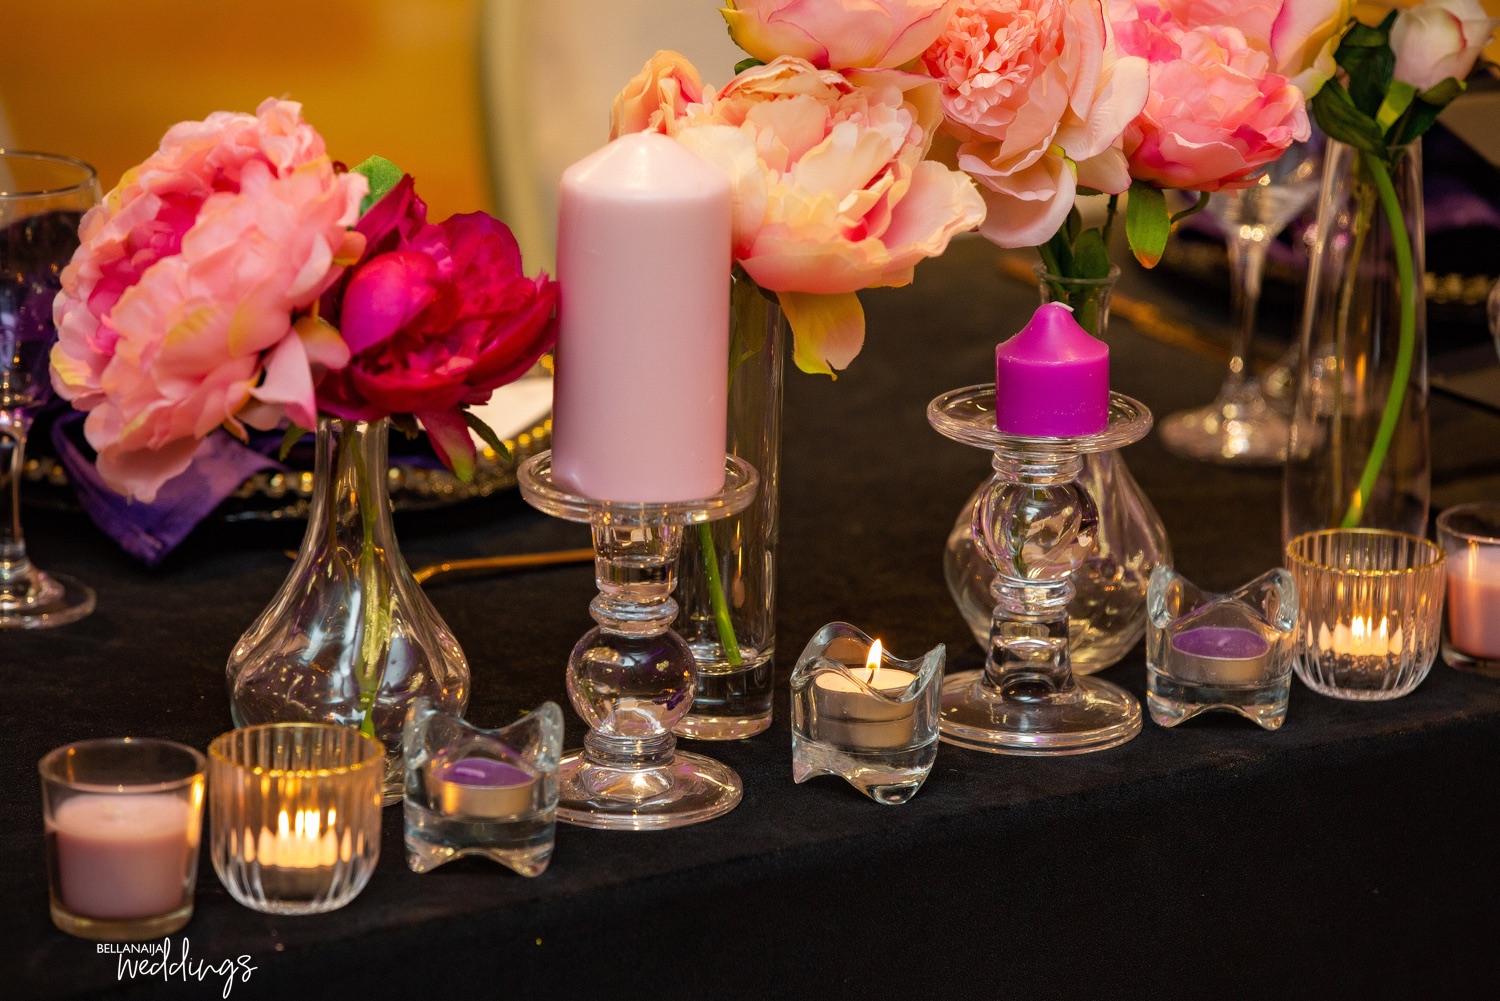 Here's how black, gold and purple can bring that luxurious feel to your wedding